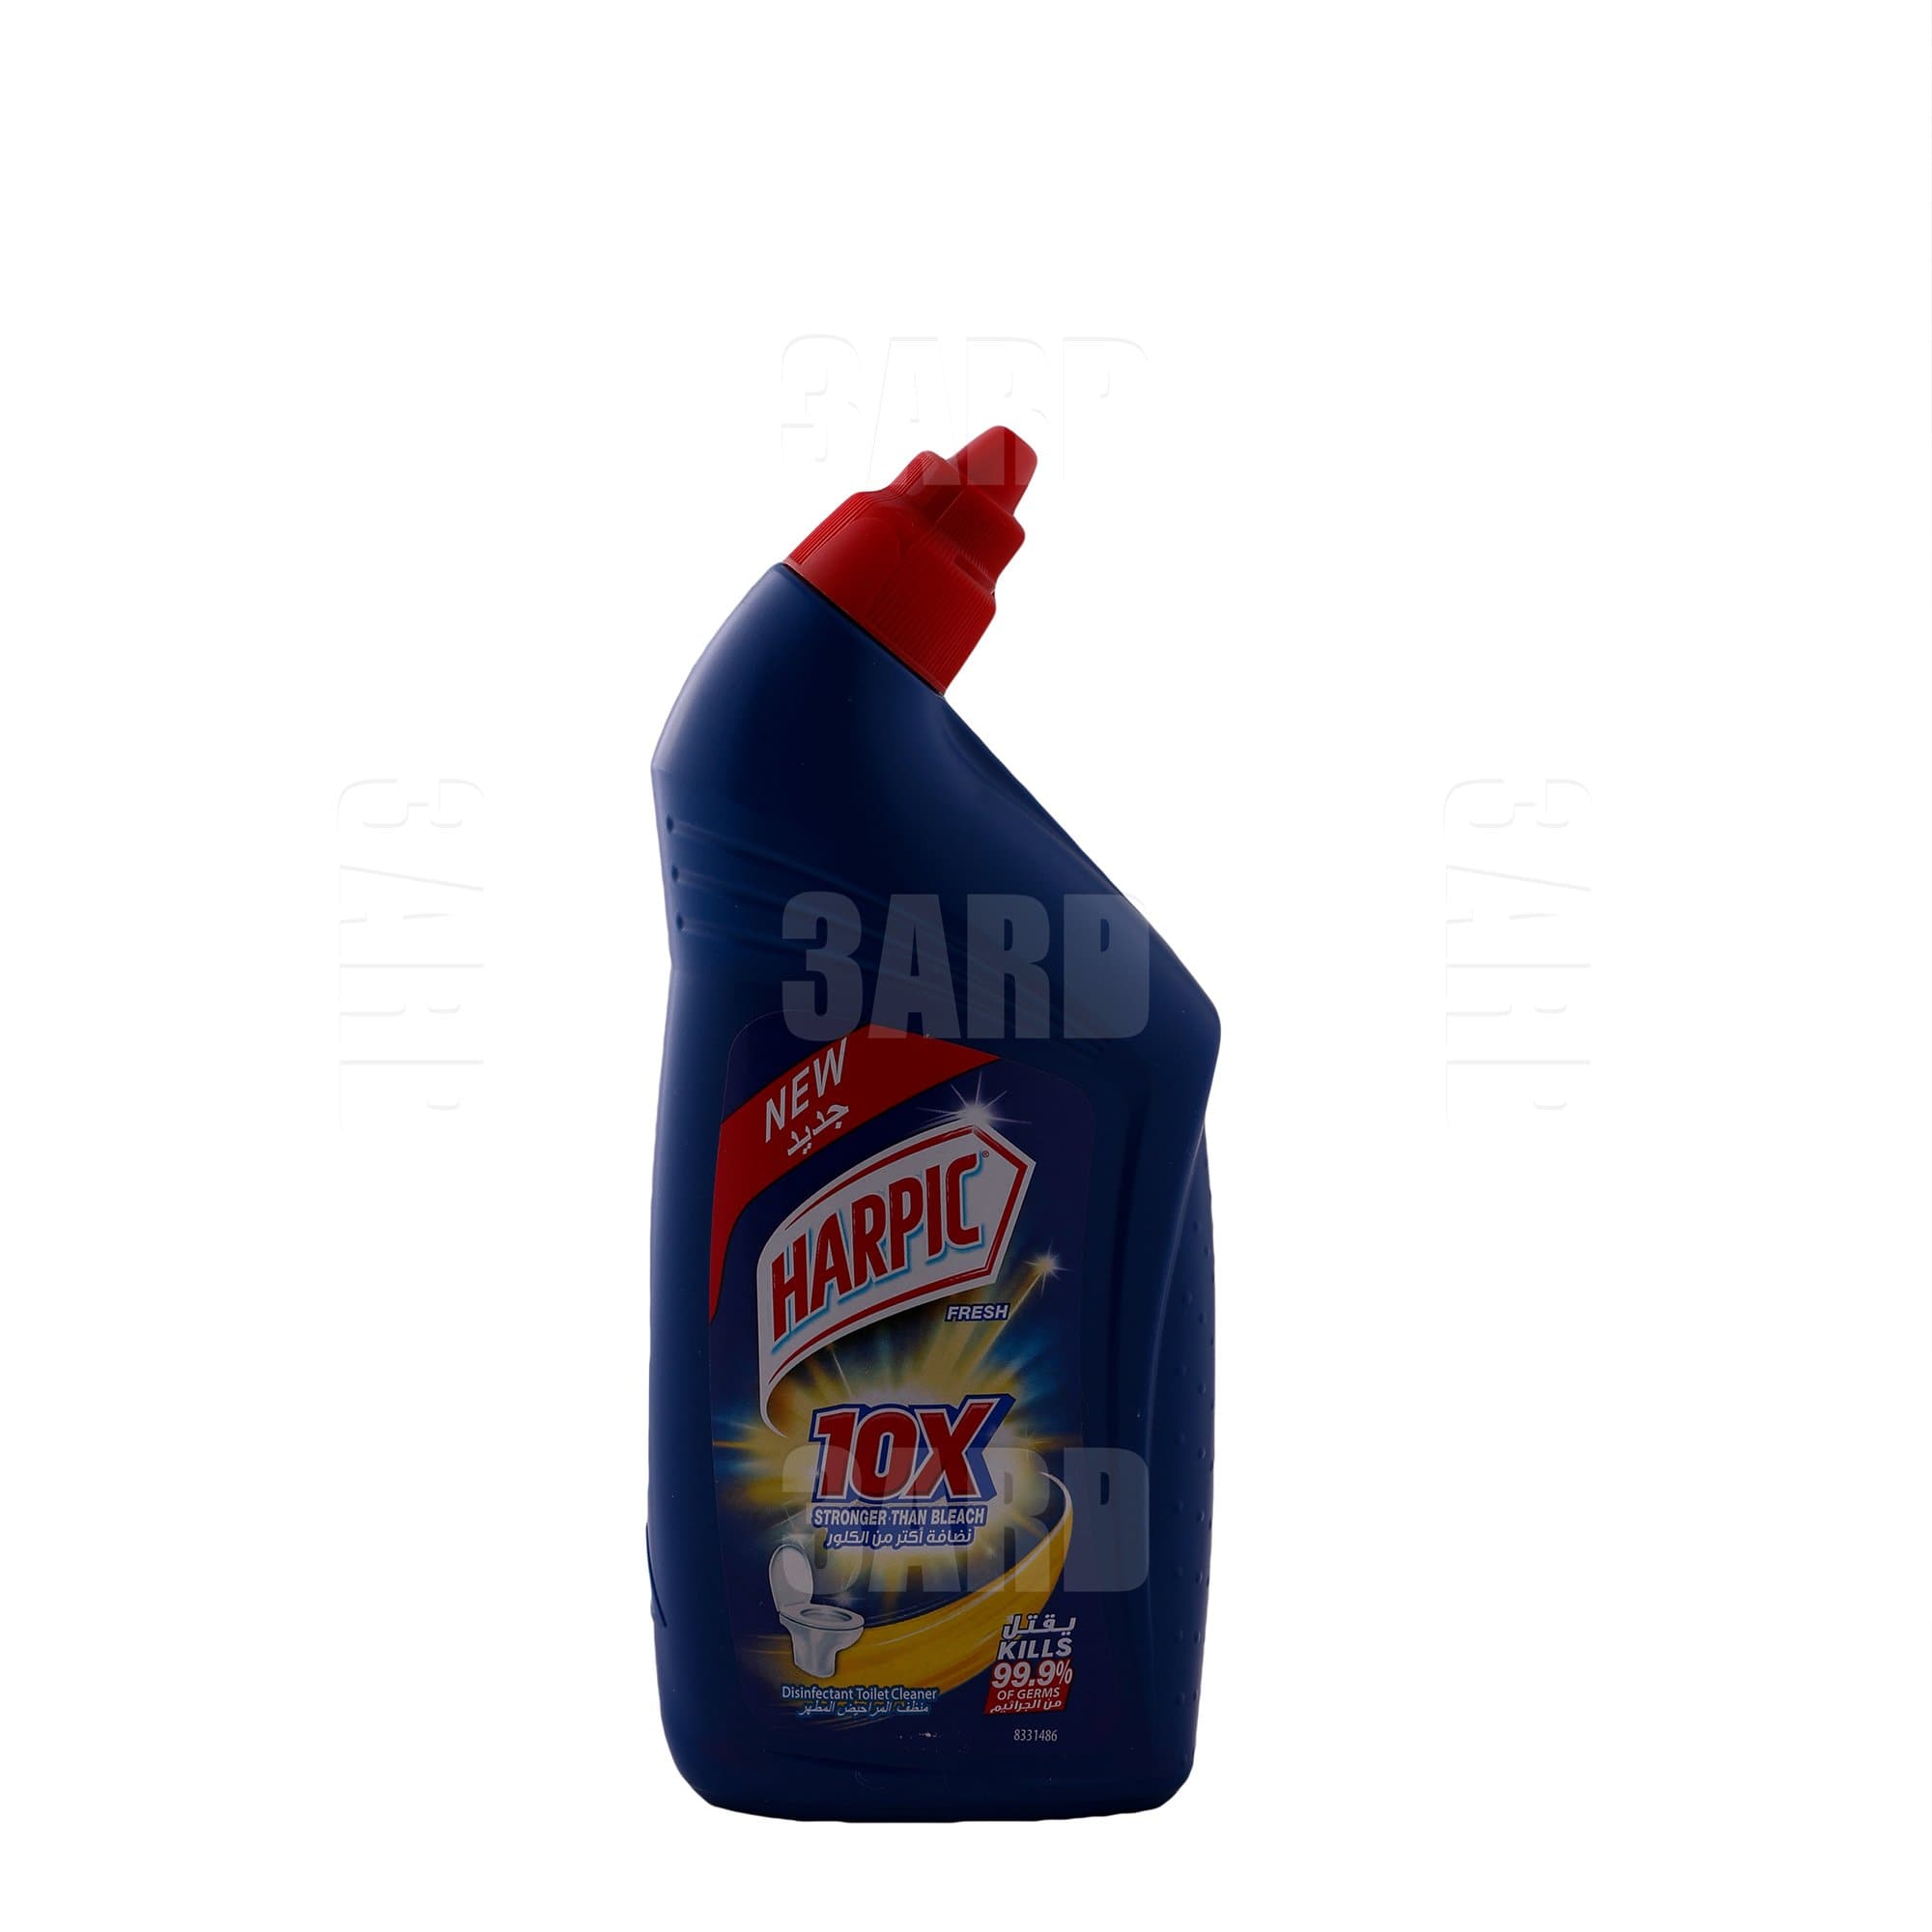 Harpic Toilet Cleaner Power Plus 10X 450ml - Pack of 3 – 3ard